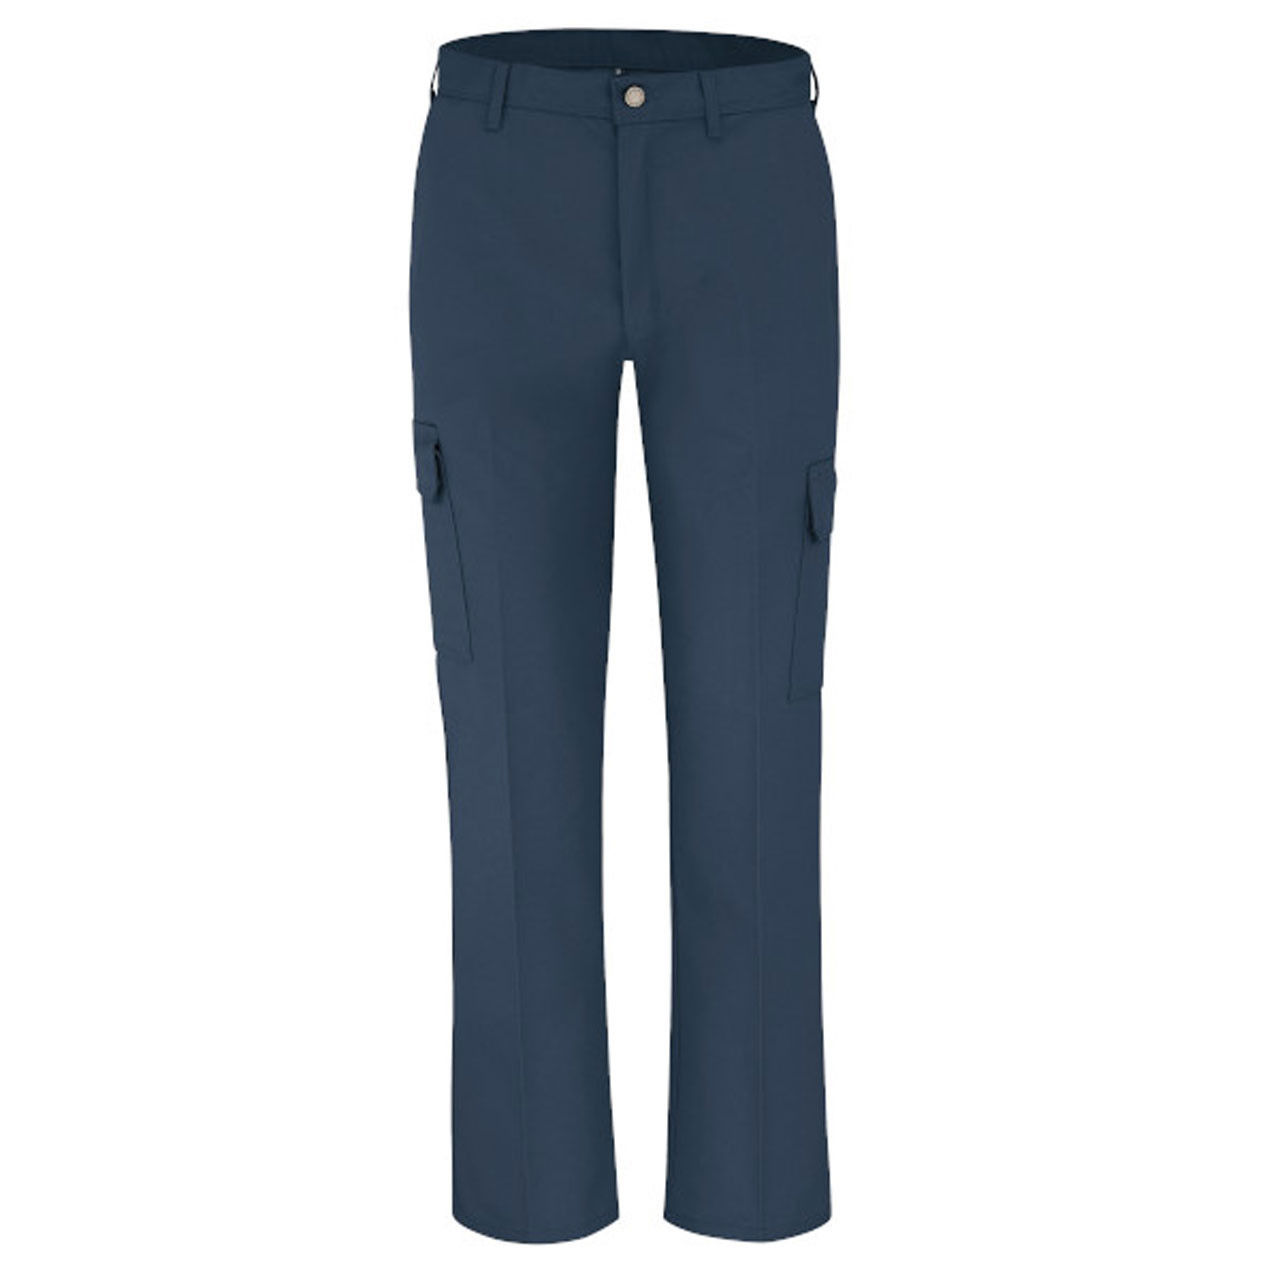 What's the waistband size of these blue dickies pants?